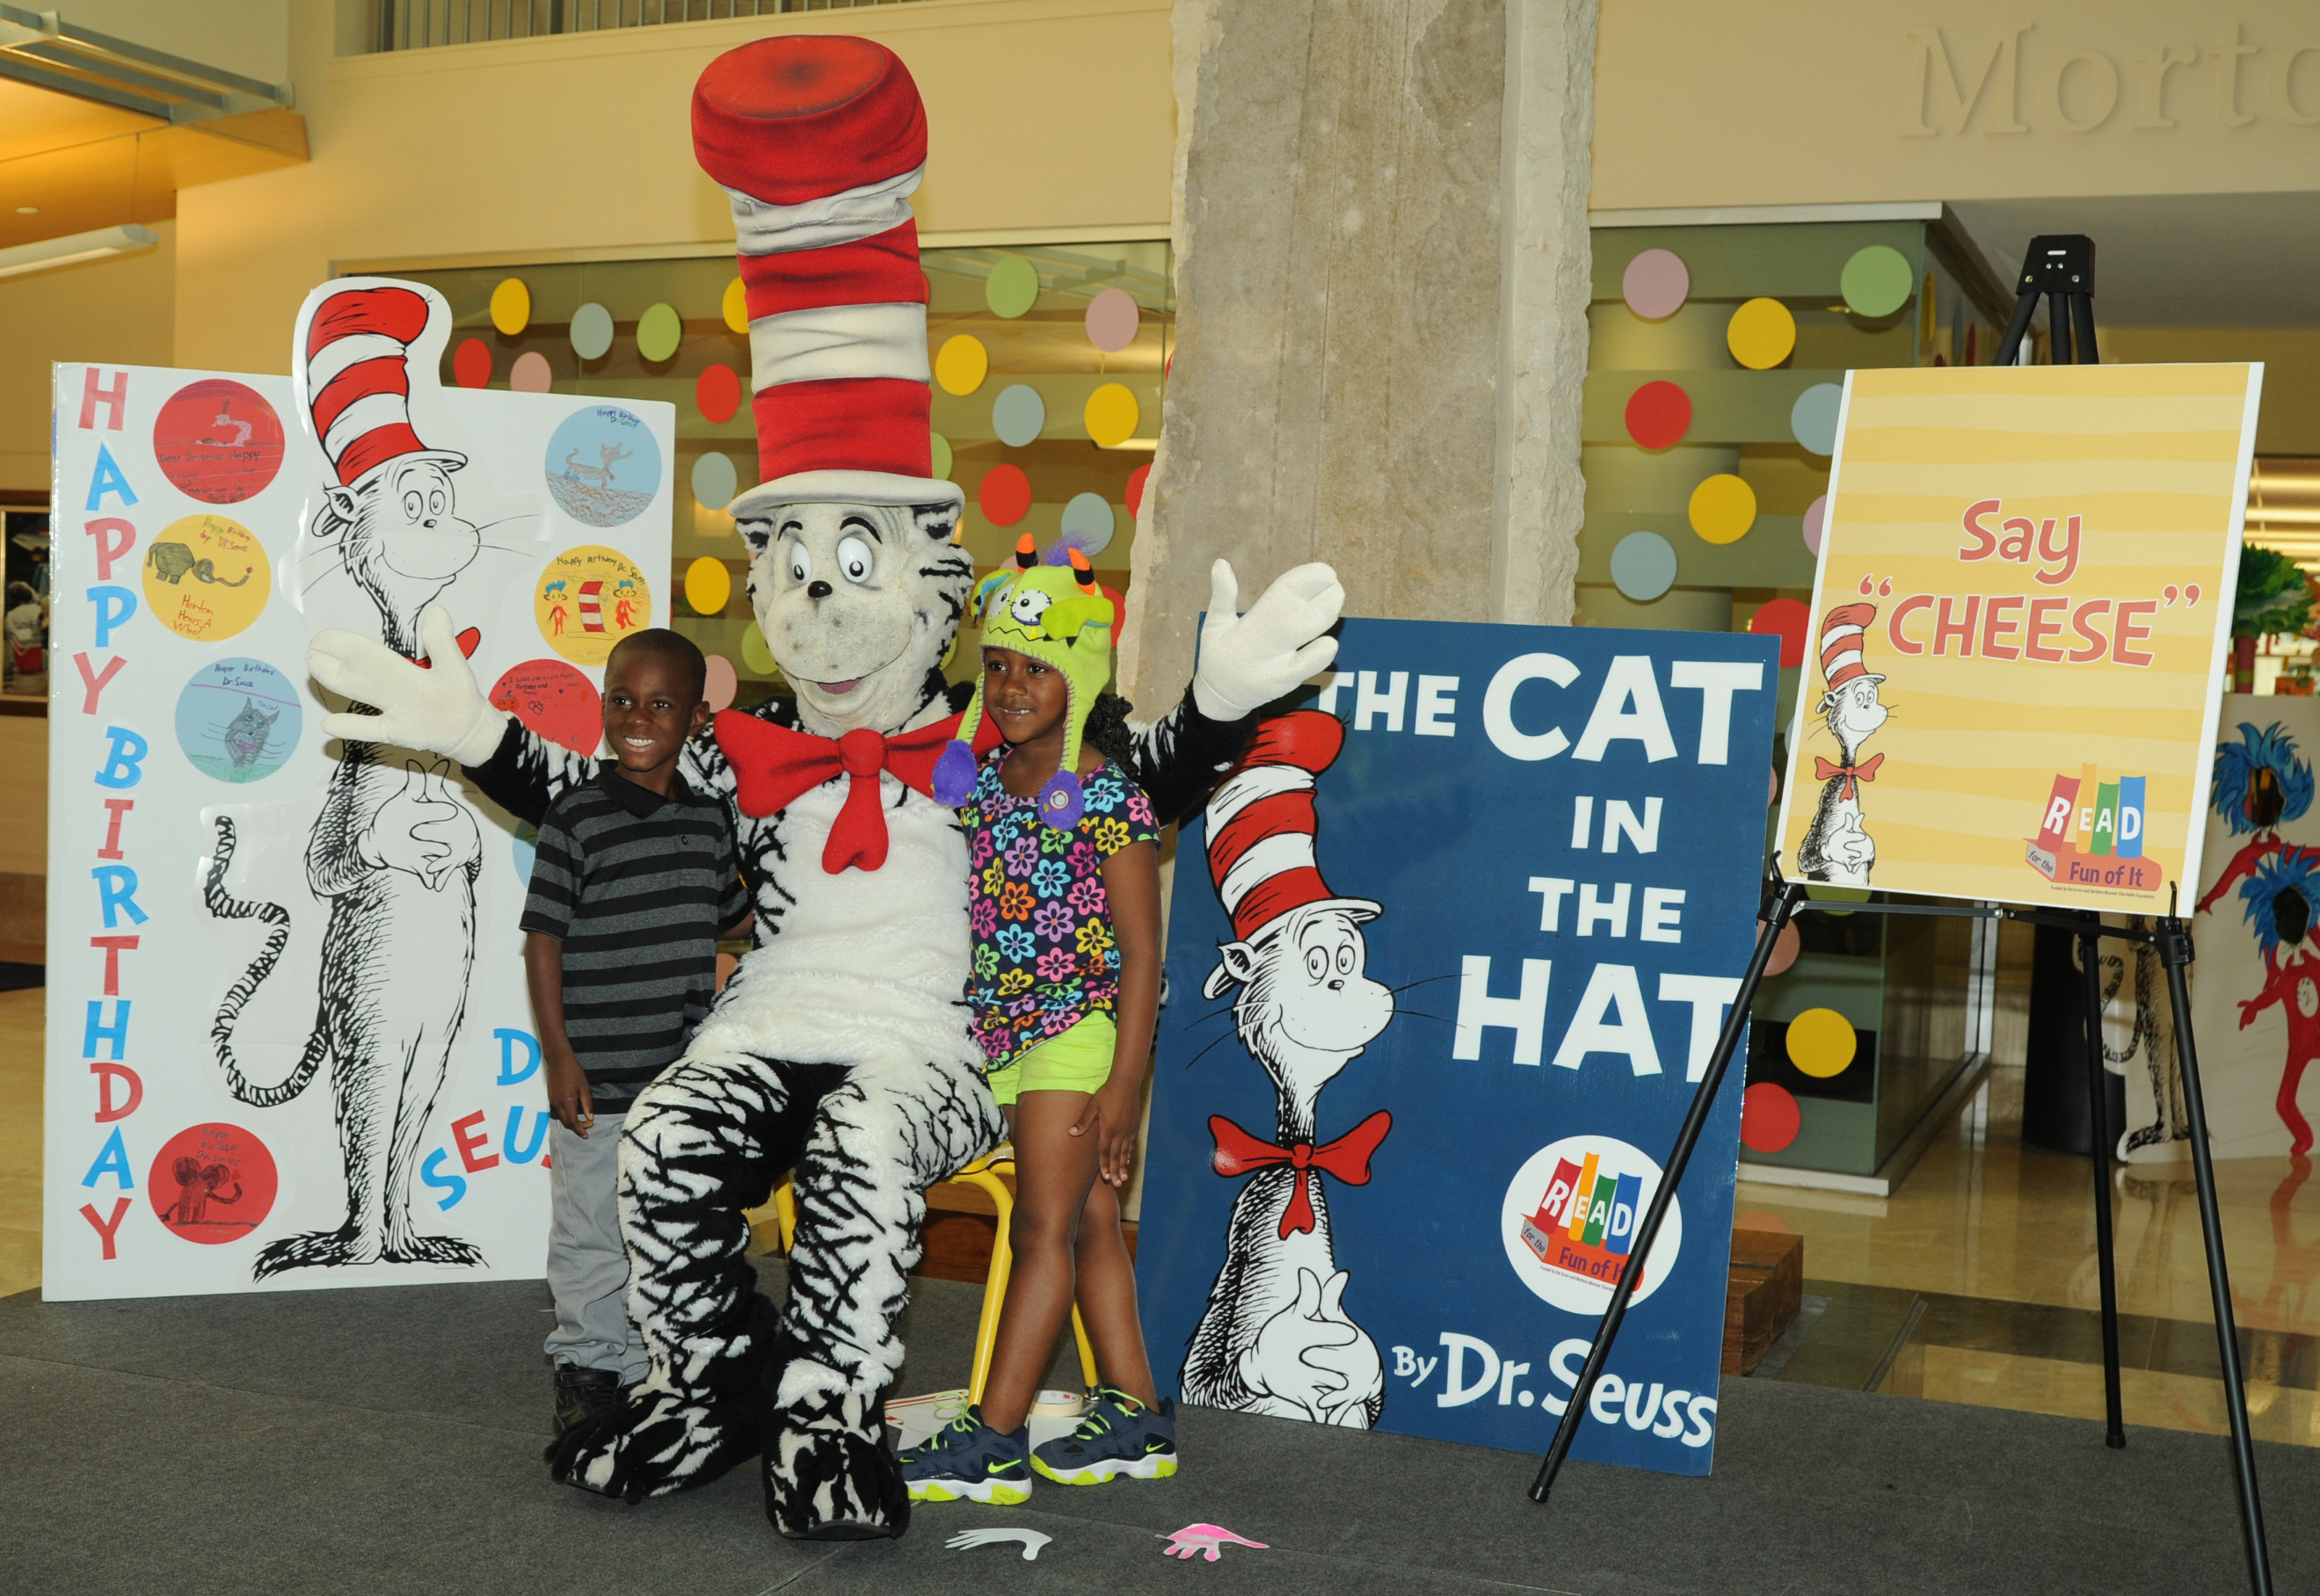 Libraries across the country celebrated Read Across America Day on Sunday, March 2, Dr. Seuss’s birthday.